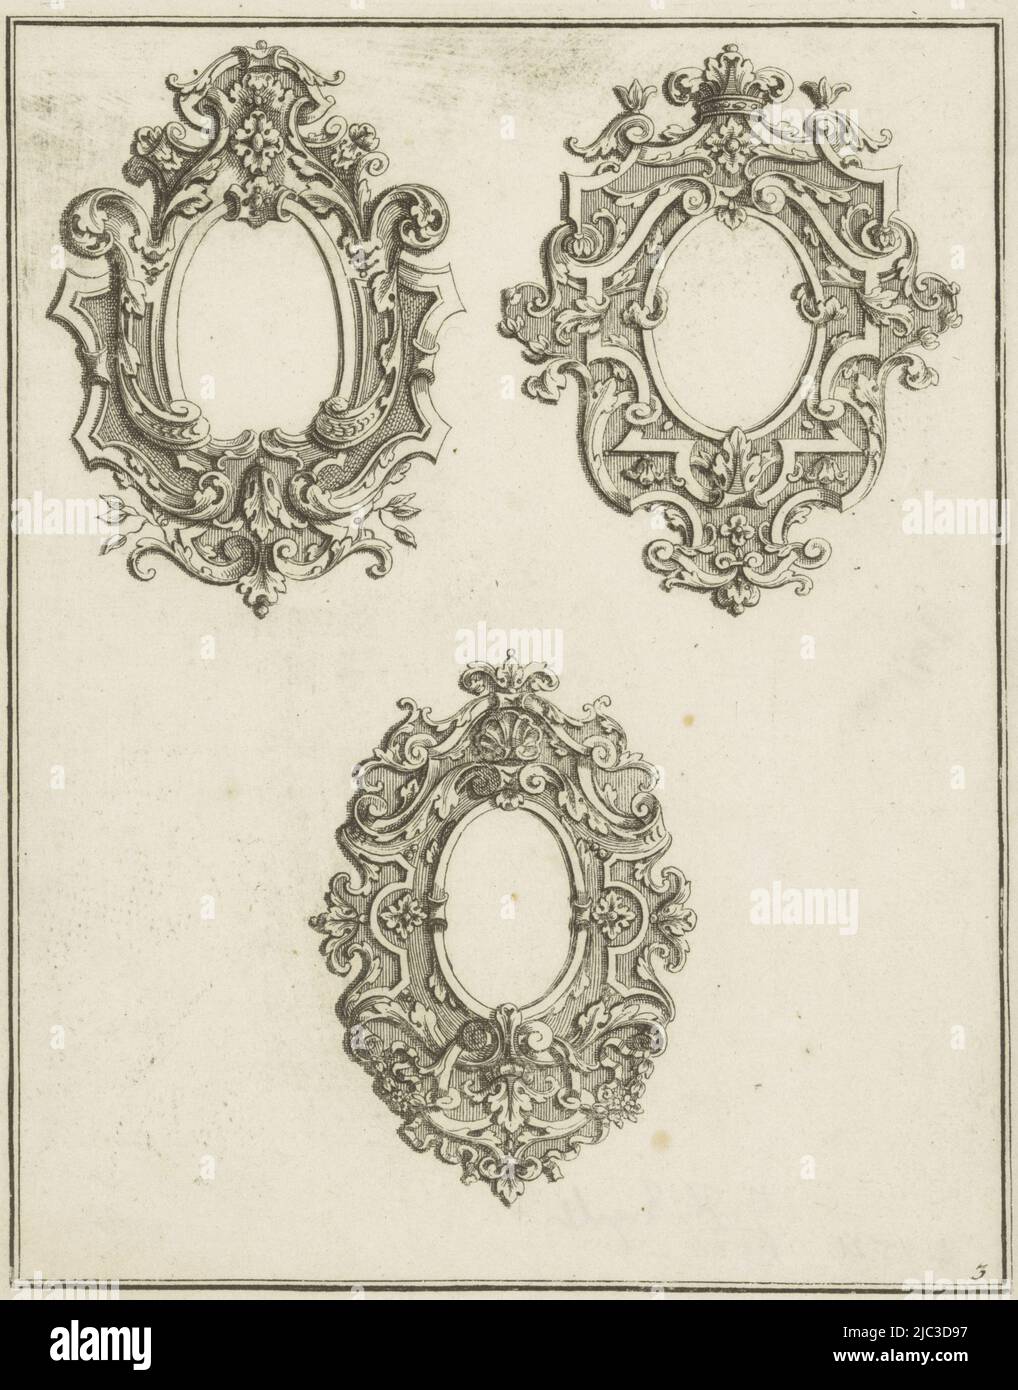 Top left frame with wickerwork, a floral motif and acanthus leaves on left and right. The upper right frame is decorated with wickerwork and leaves and is crowned at the top with acanthus leaves. The lower frame has wickerwork and acanthus leaves and rocaille ornament at top, Three oval cartouches Ornamental shields for various professions (series title) Unterschiedliche Art neu inventirter Schilder f, print maker: anonymous, Johann Leonhard Eisler, publisher: weduwe Johann Christoph Weigel, Neurenberg, 1726 - 1734, paper, etching, h 215 mm × w 172 mm Stock Photo